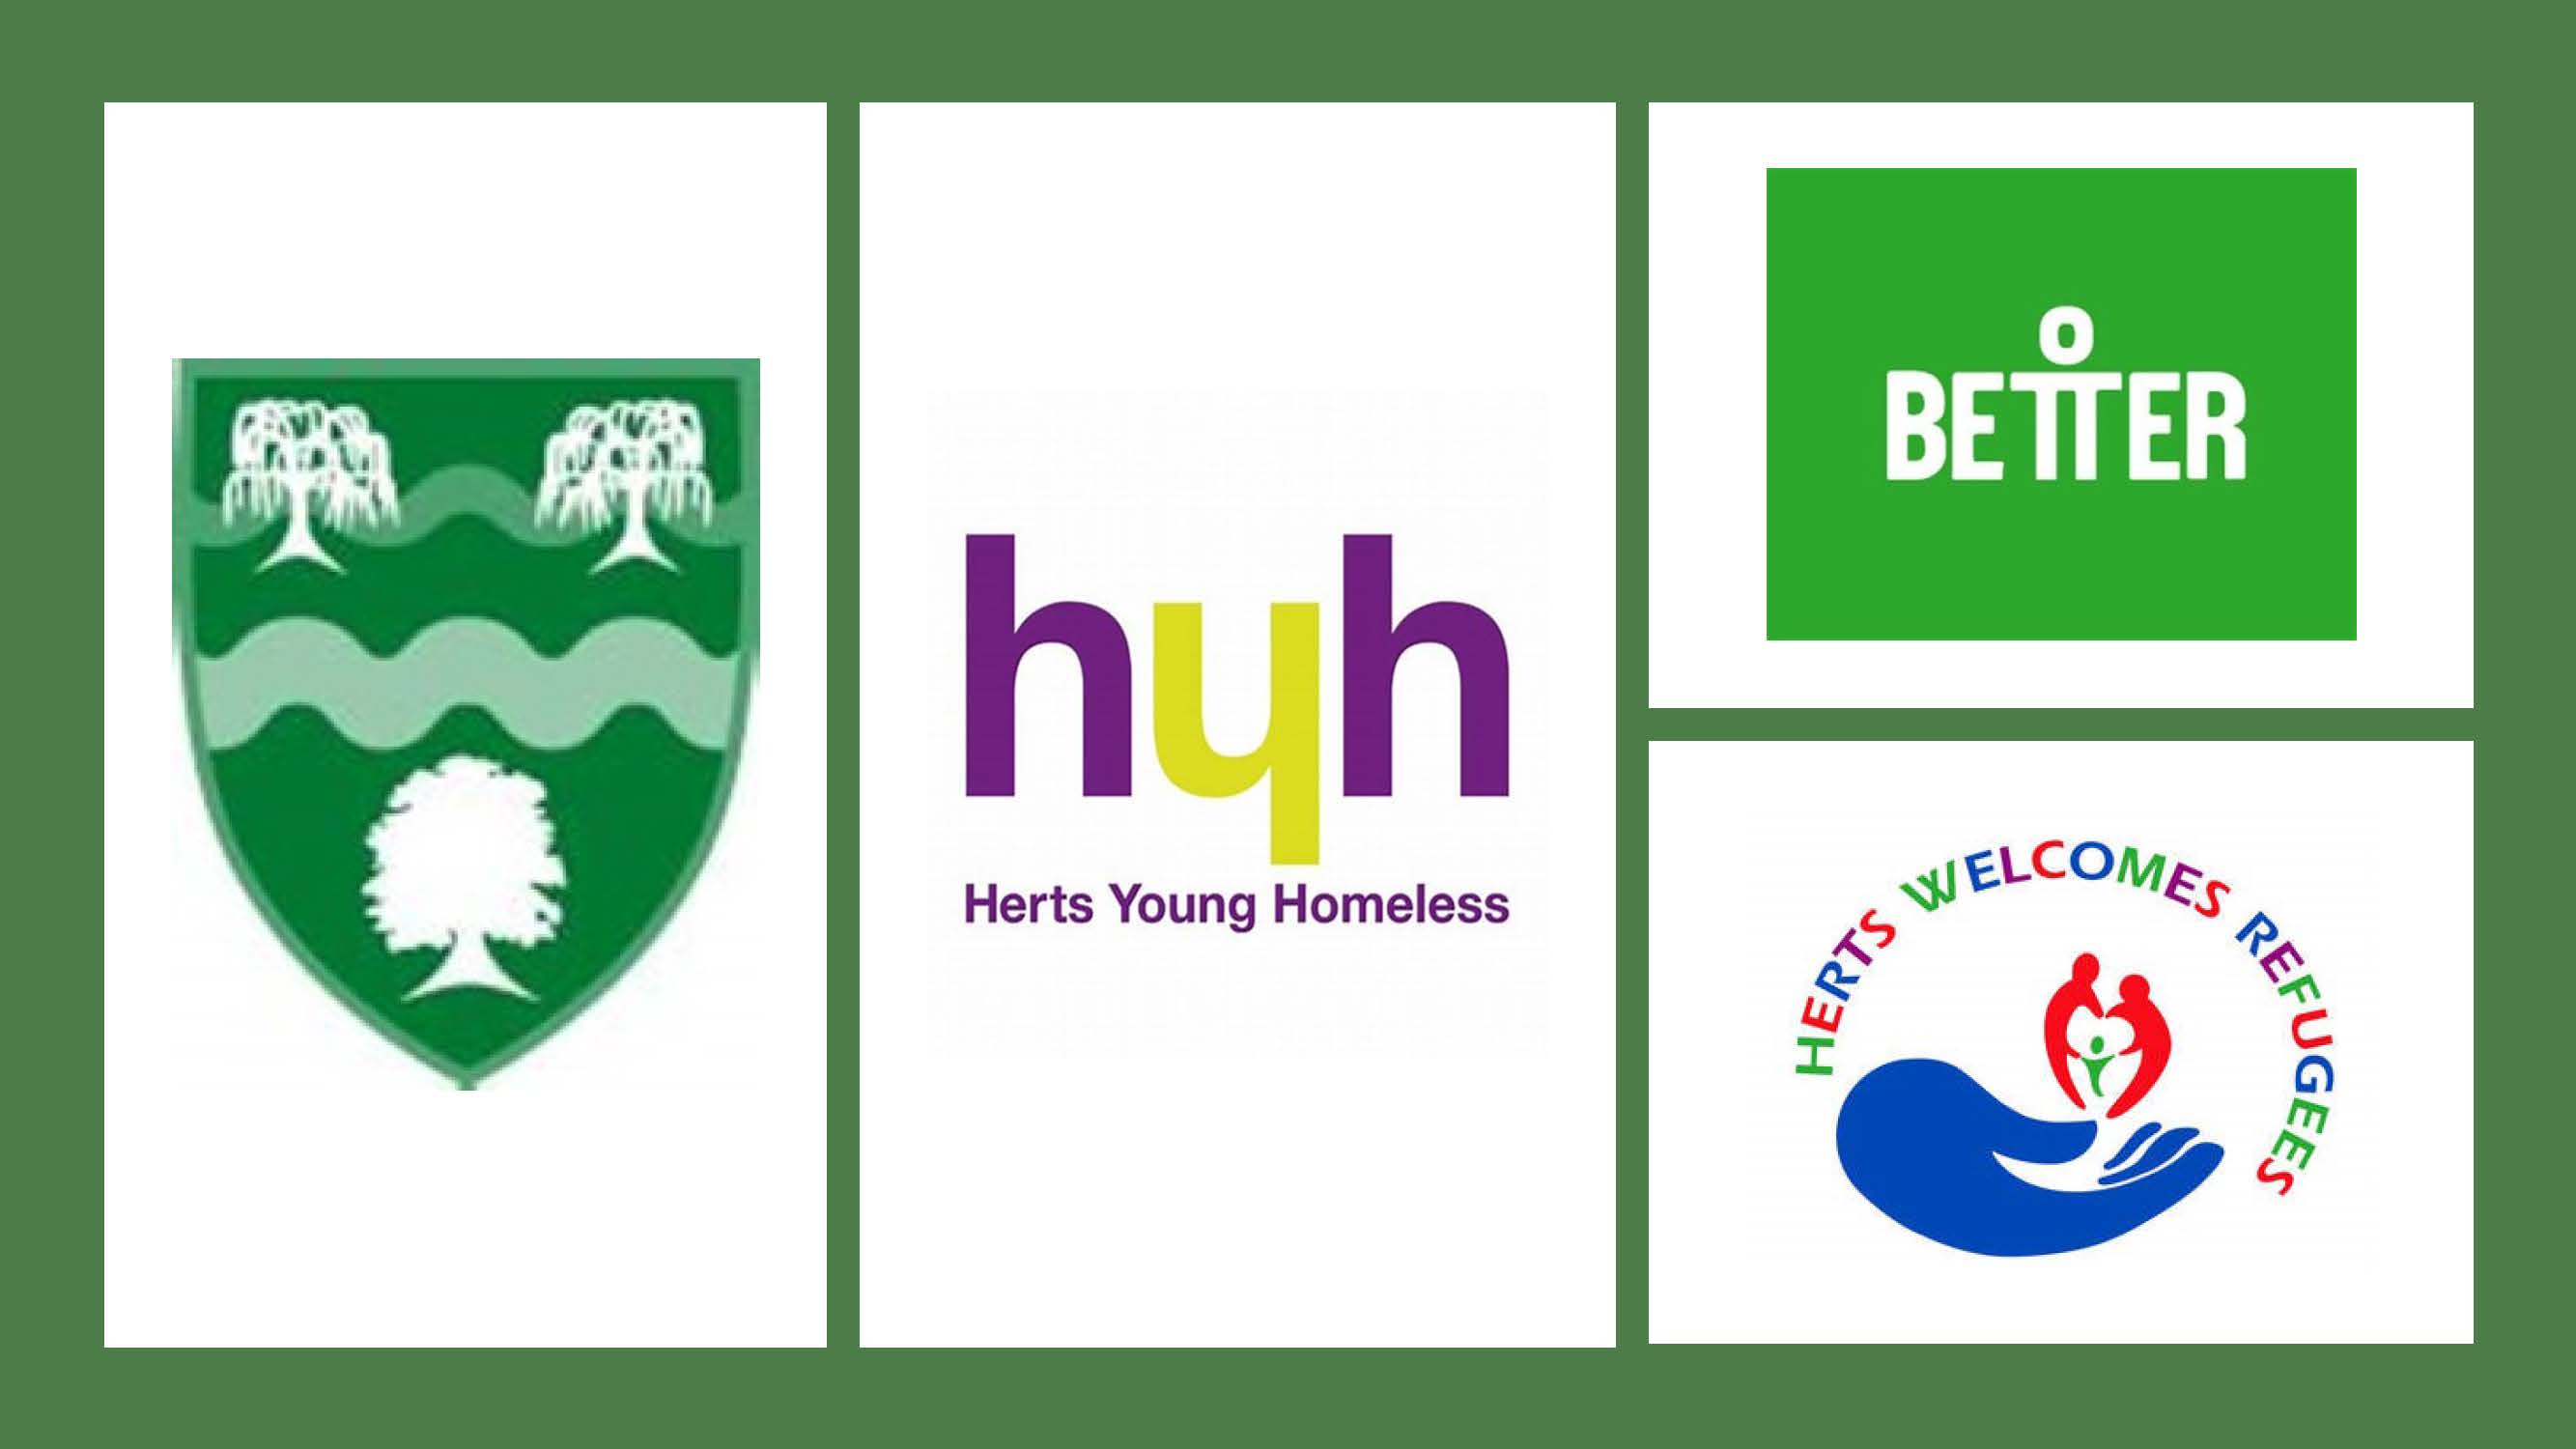 Welwyn Hatfield Borough Council, Herts Young Homeless, Greenwich Leisure Limited - Better, Herts Welcomes Refugees